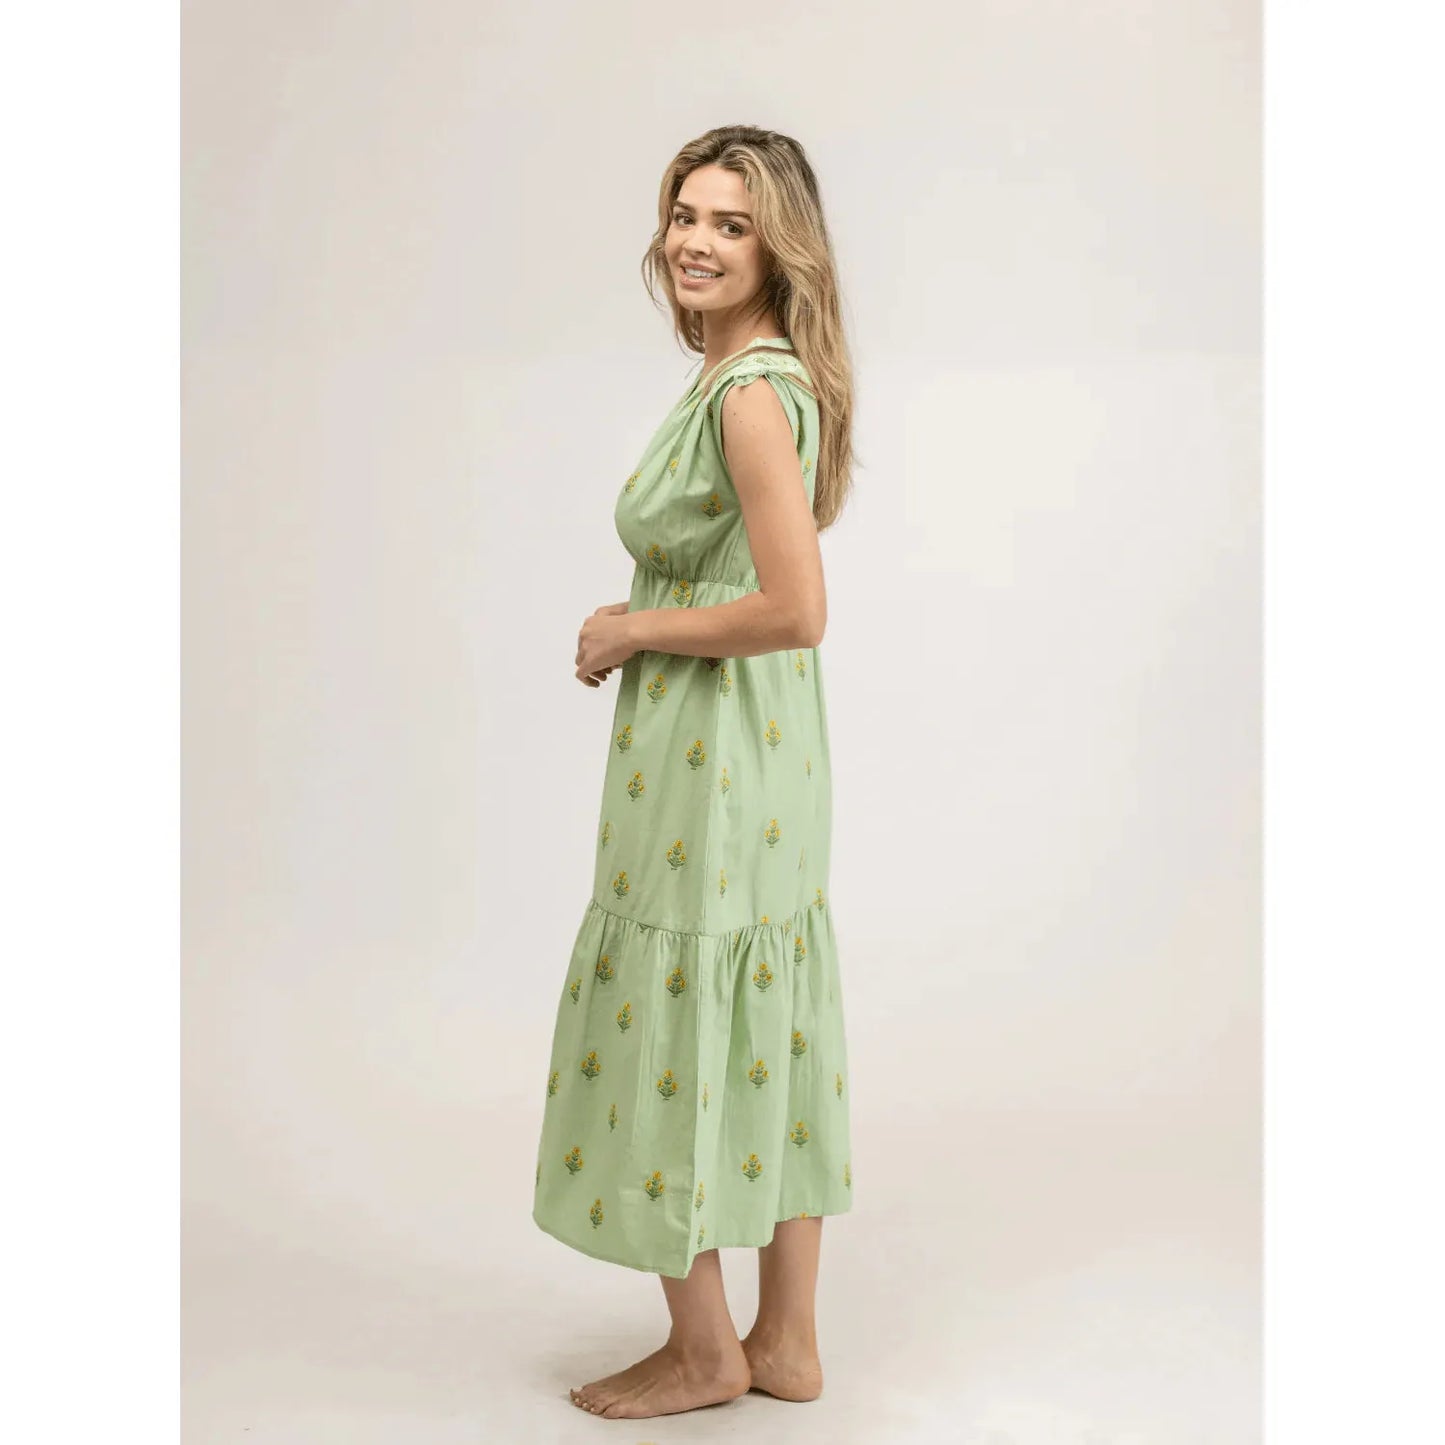 Blaire Dress in petite green floral